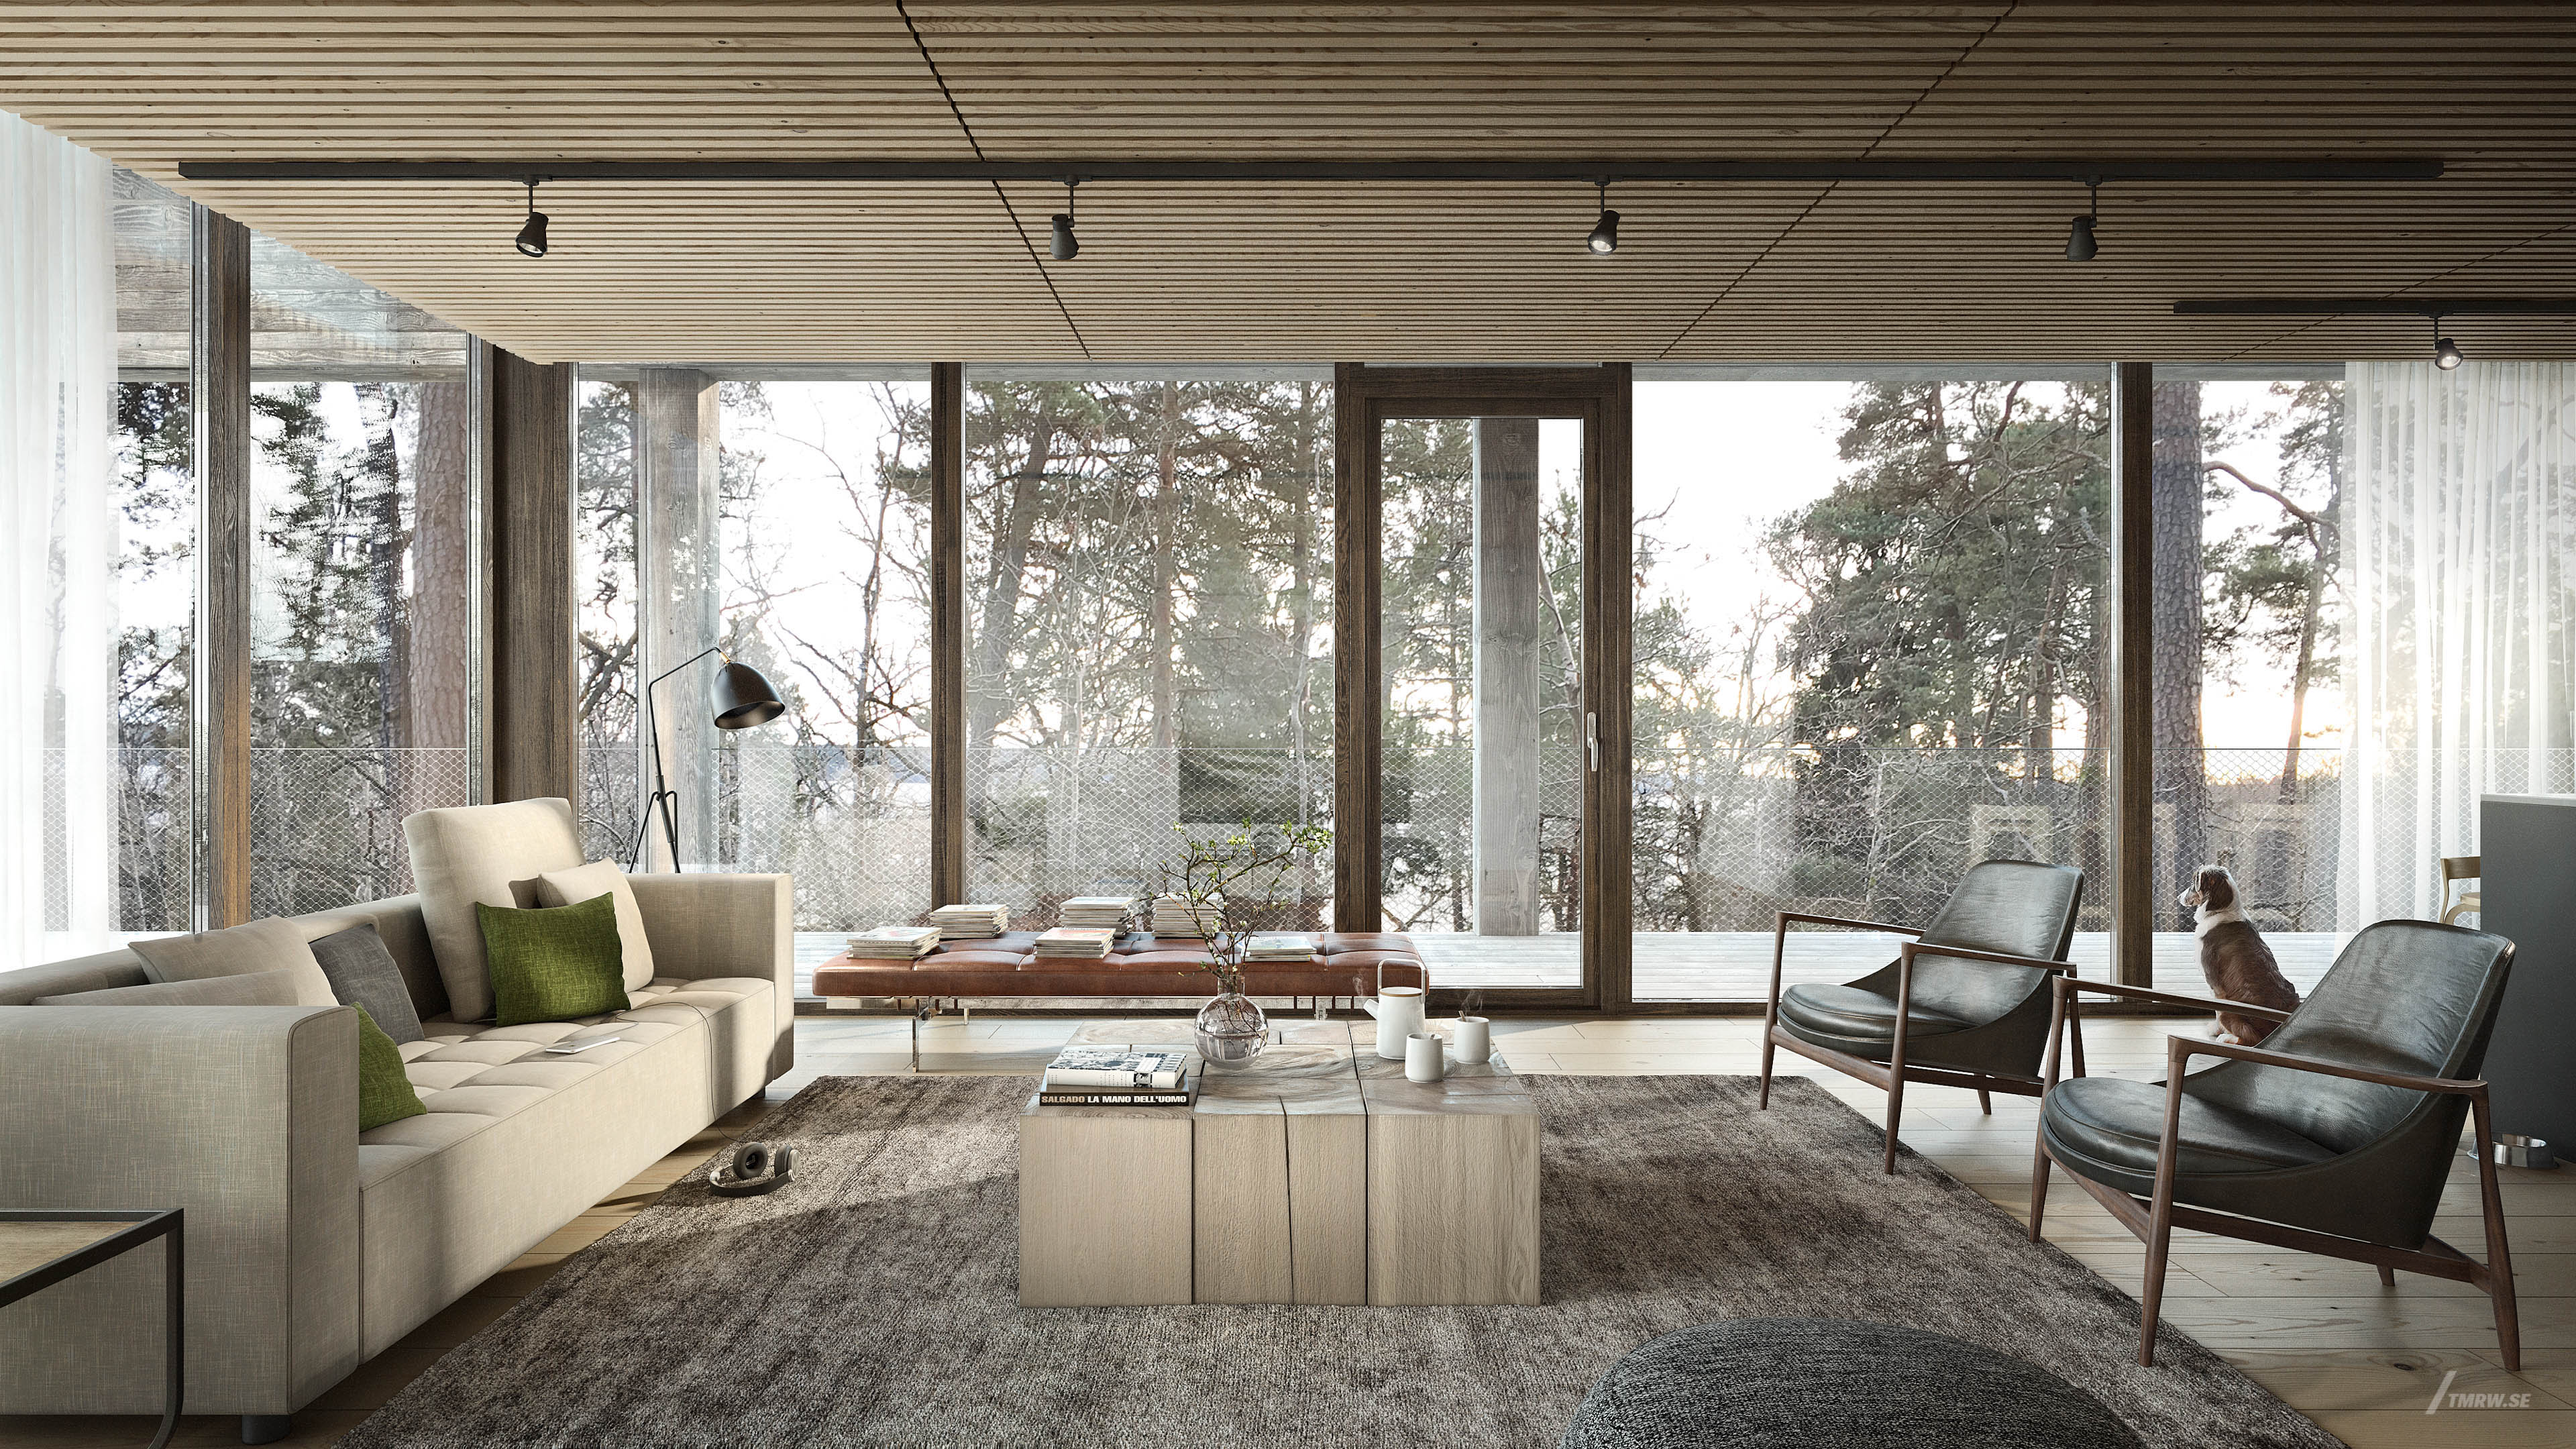 Architectural visualization of Traryd for Skarp, interior of living room with lots of windows, dog looking out